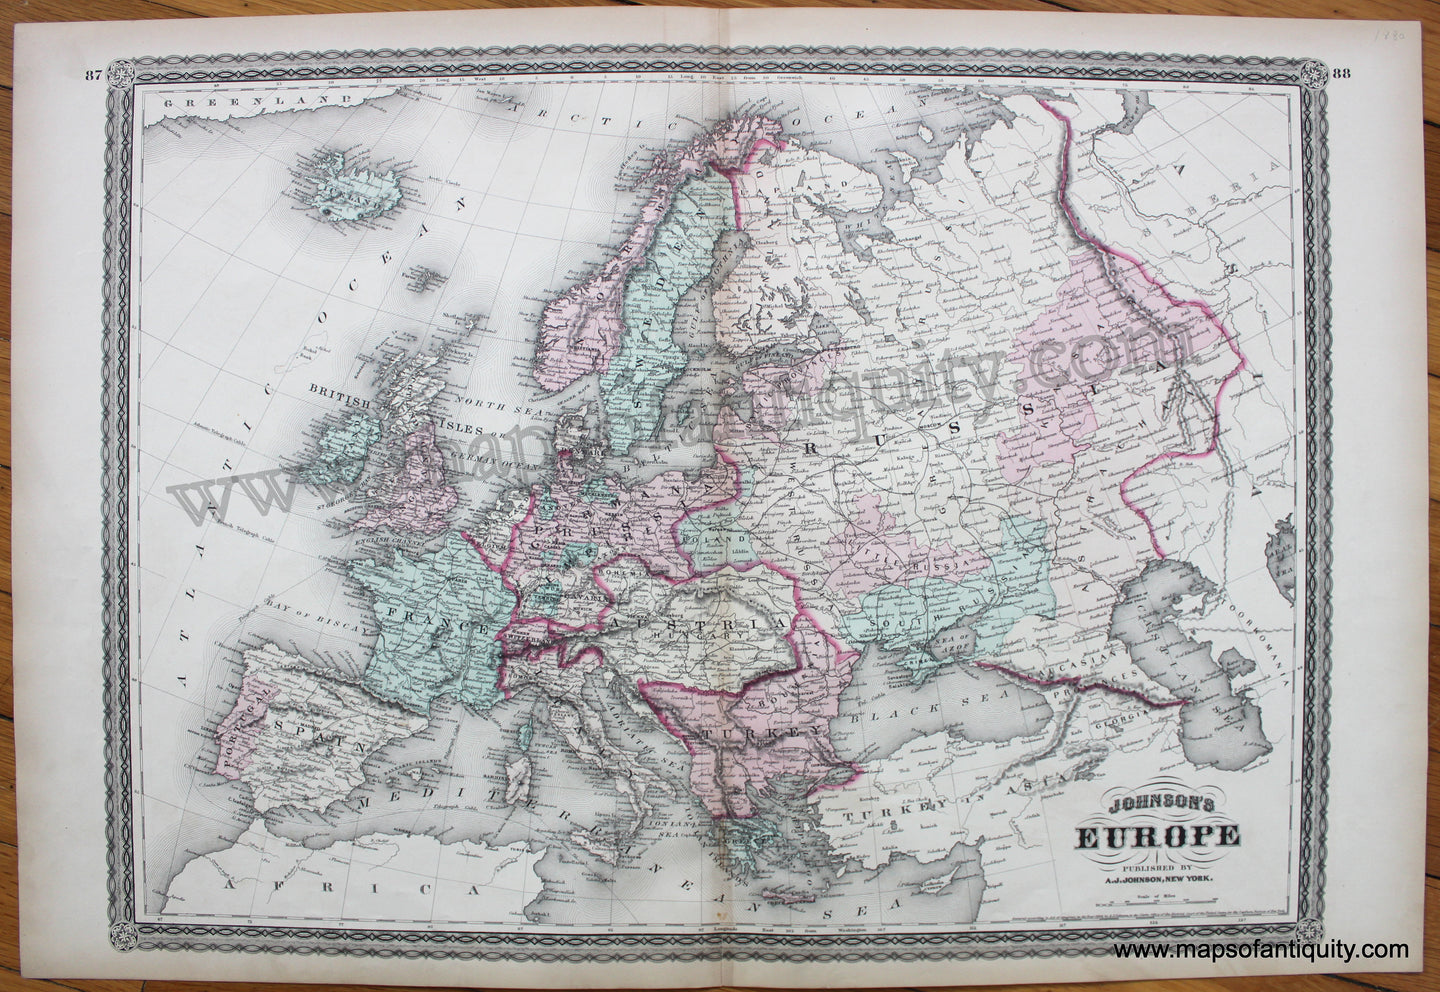 Antique-Hand-Colored-Map-Johnson's-Europe-1880-Alvin-J.-Johnson-&-Son-1800s-19th-century-Maps-of-Antiquity